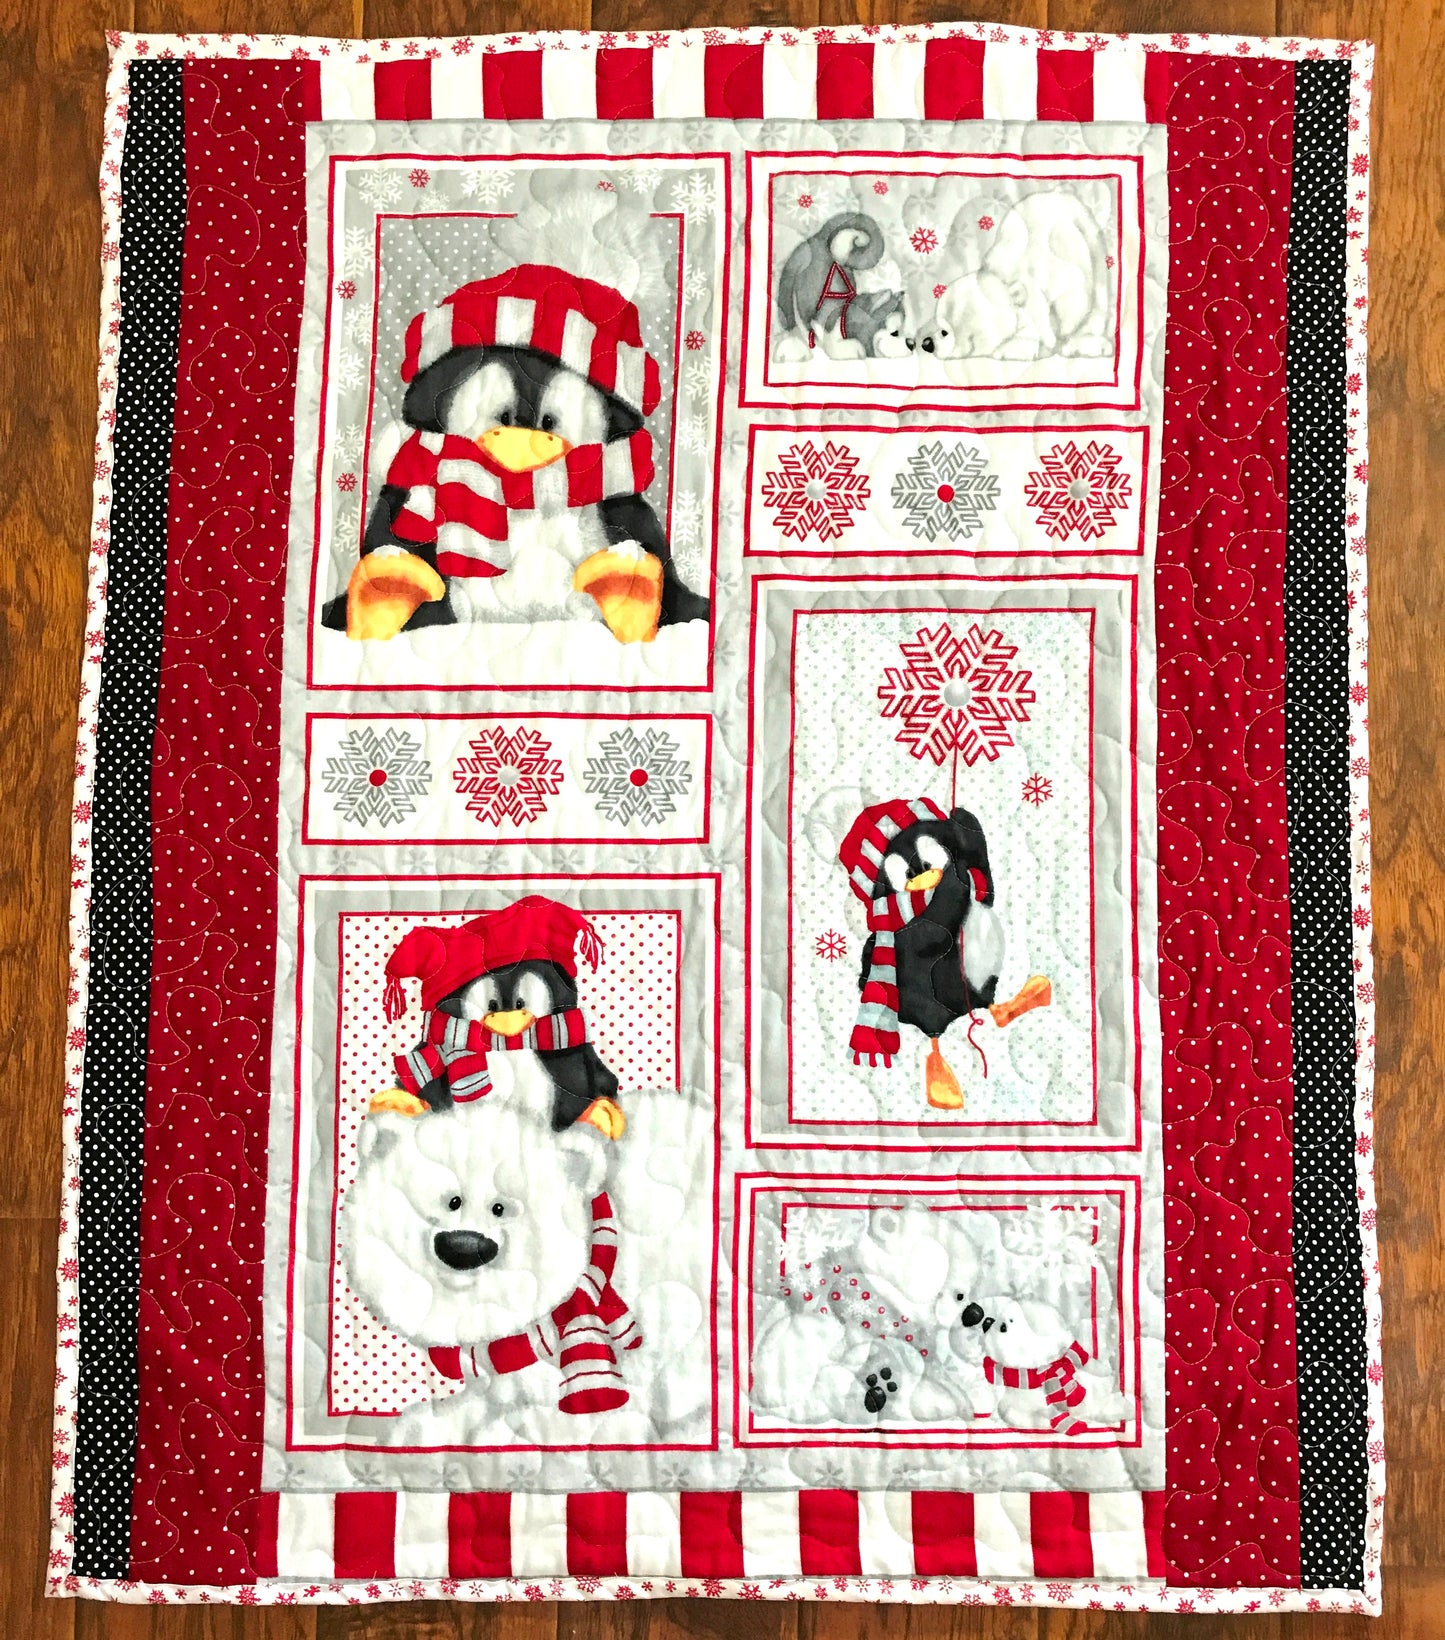 Winter Artic Penguins & Polar Bear Friends Soft Flannel Front Quilted Blanket Nursery Child Baby Toddler bedding